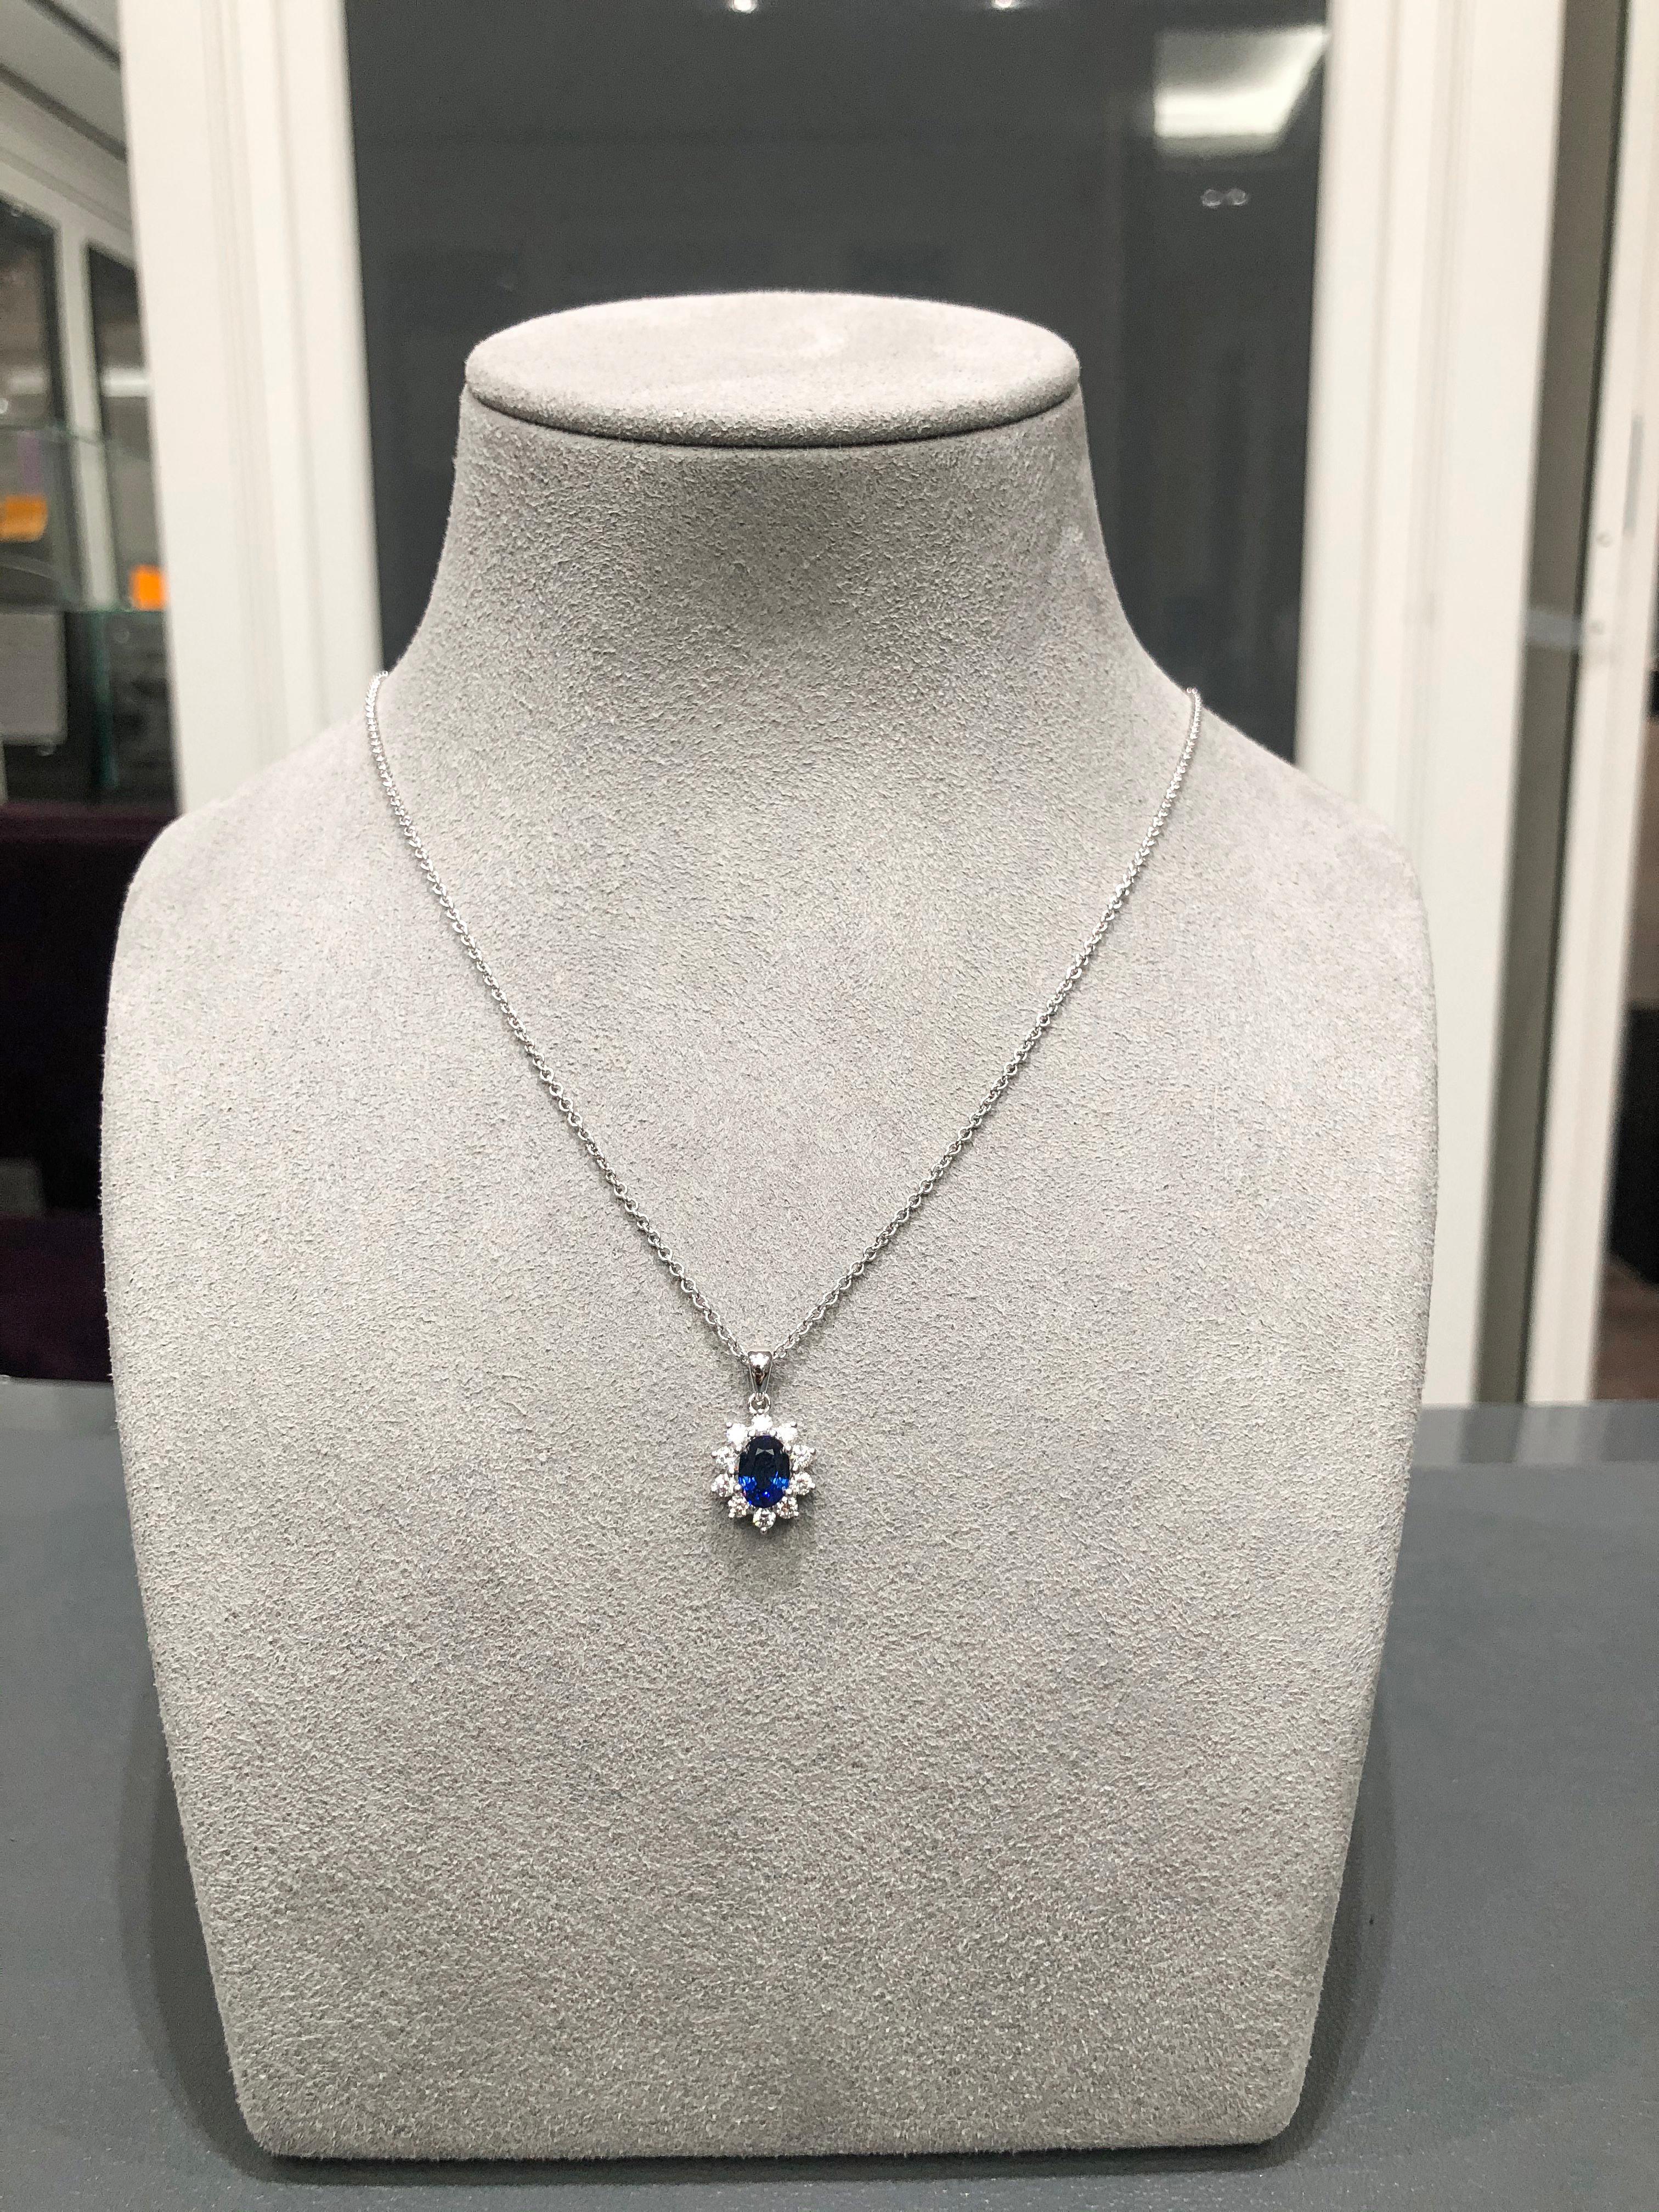 A stylish and simple pendant necklace showcasing a 0.86 carat oval cut blue sapphire, accented by round brilliant diamonds in a floral motif style. Diamonds weigh 0.35 carats total. Made with 18K White Gold, 16 inches in Length.

Style available in